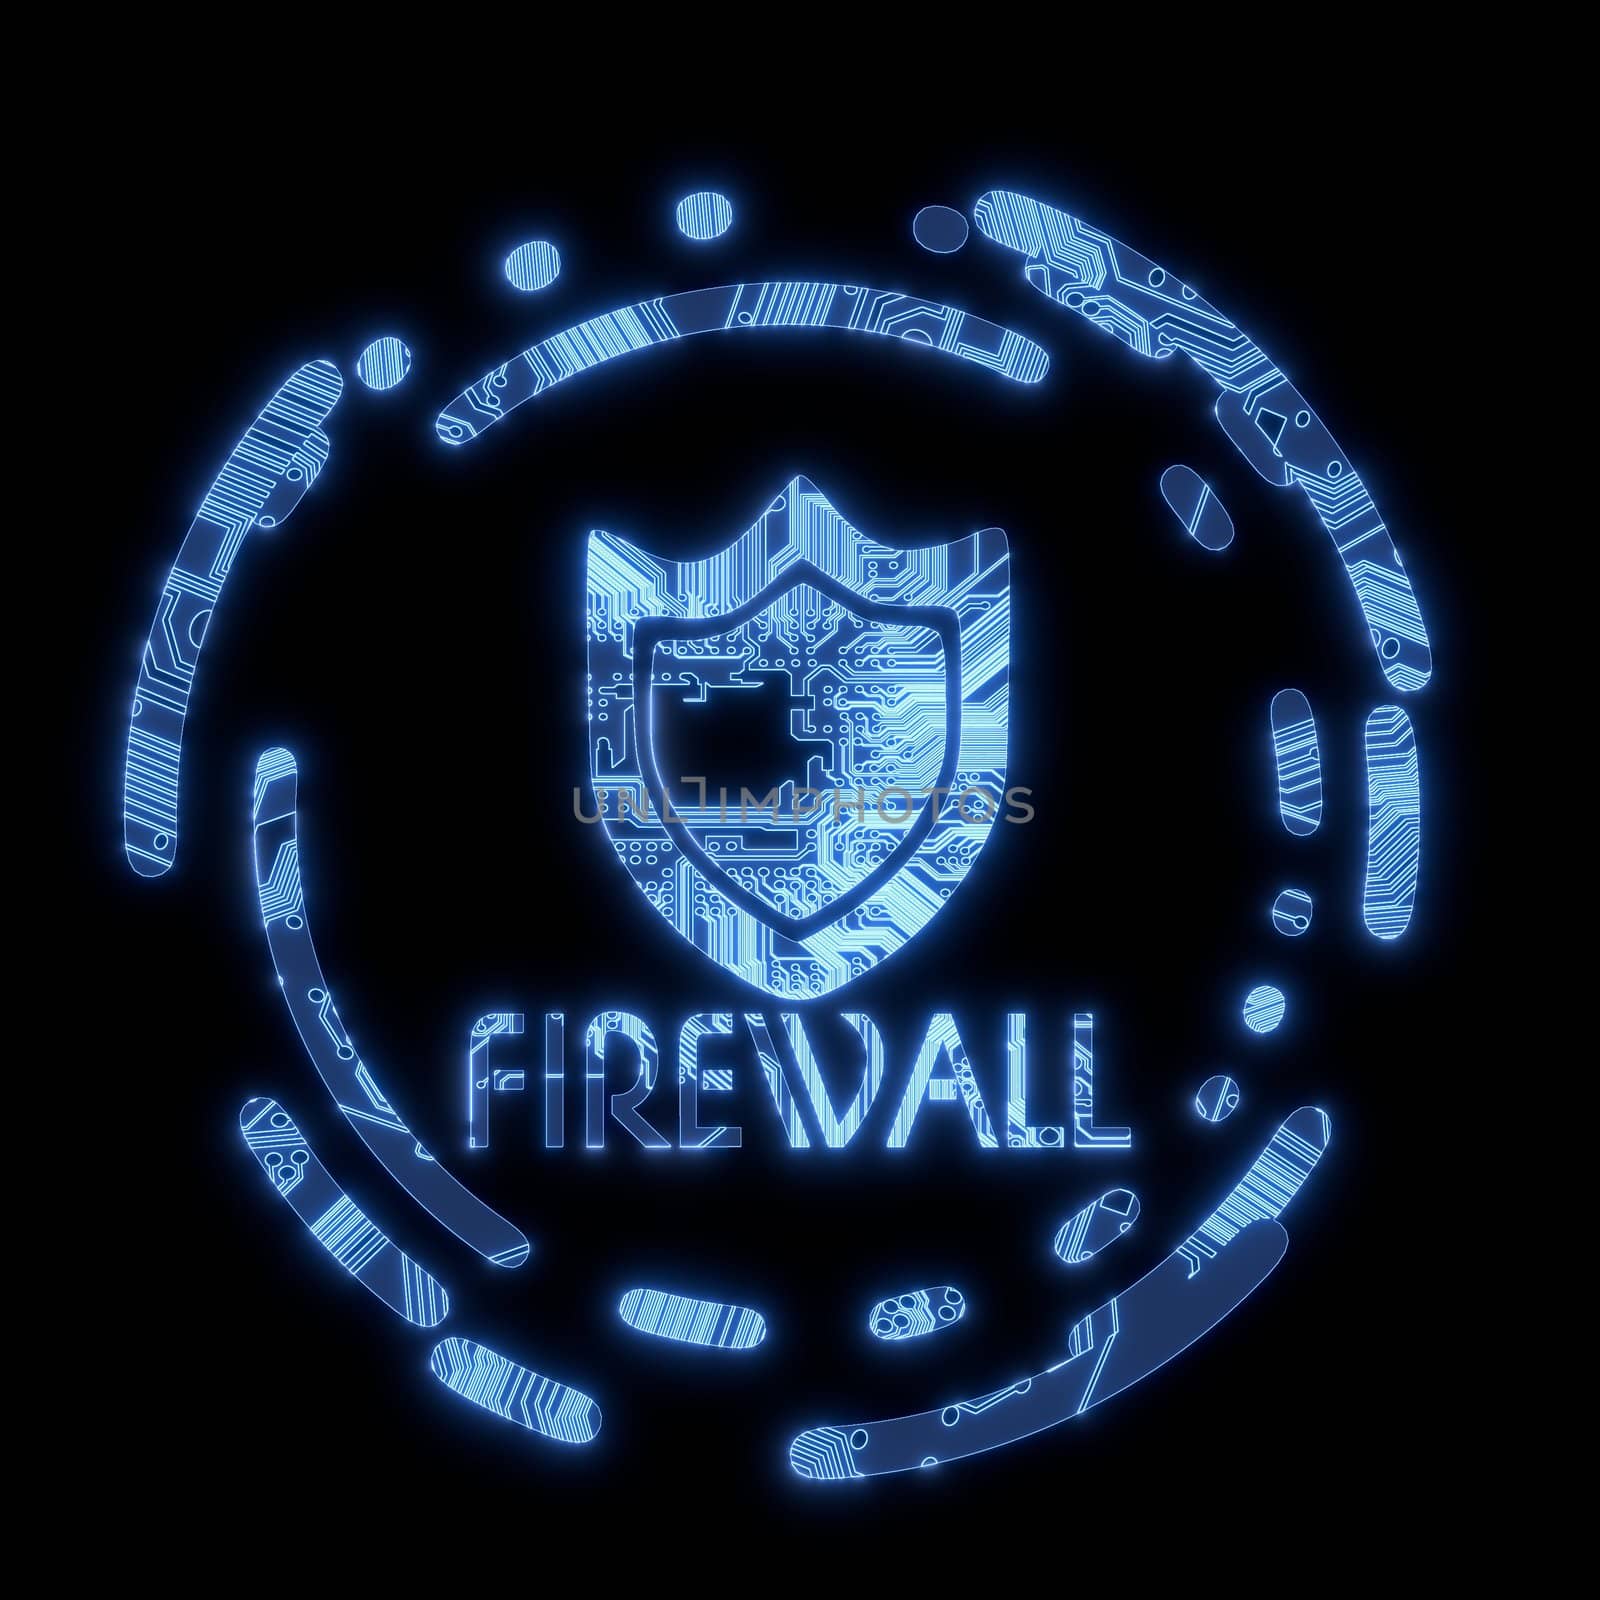 3D Graphic Steel blue electric flare firewall symbol in a dark background on a computer chip